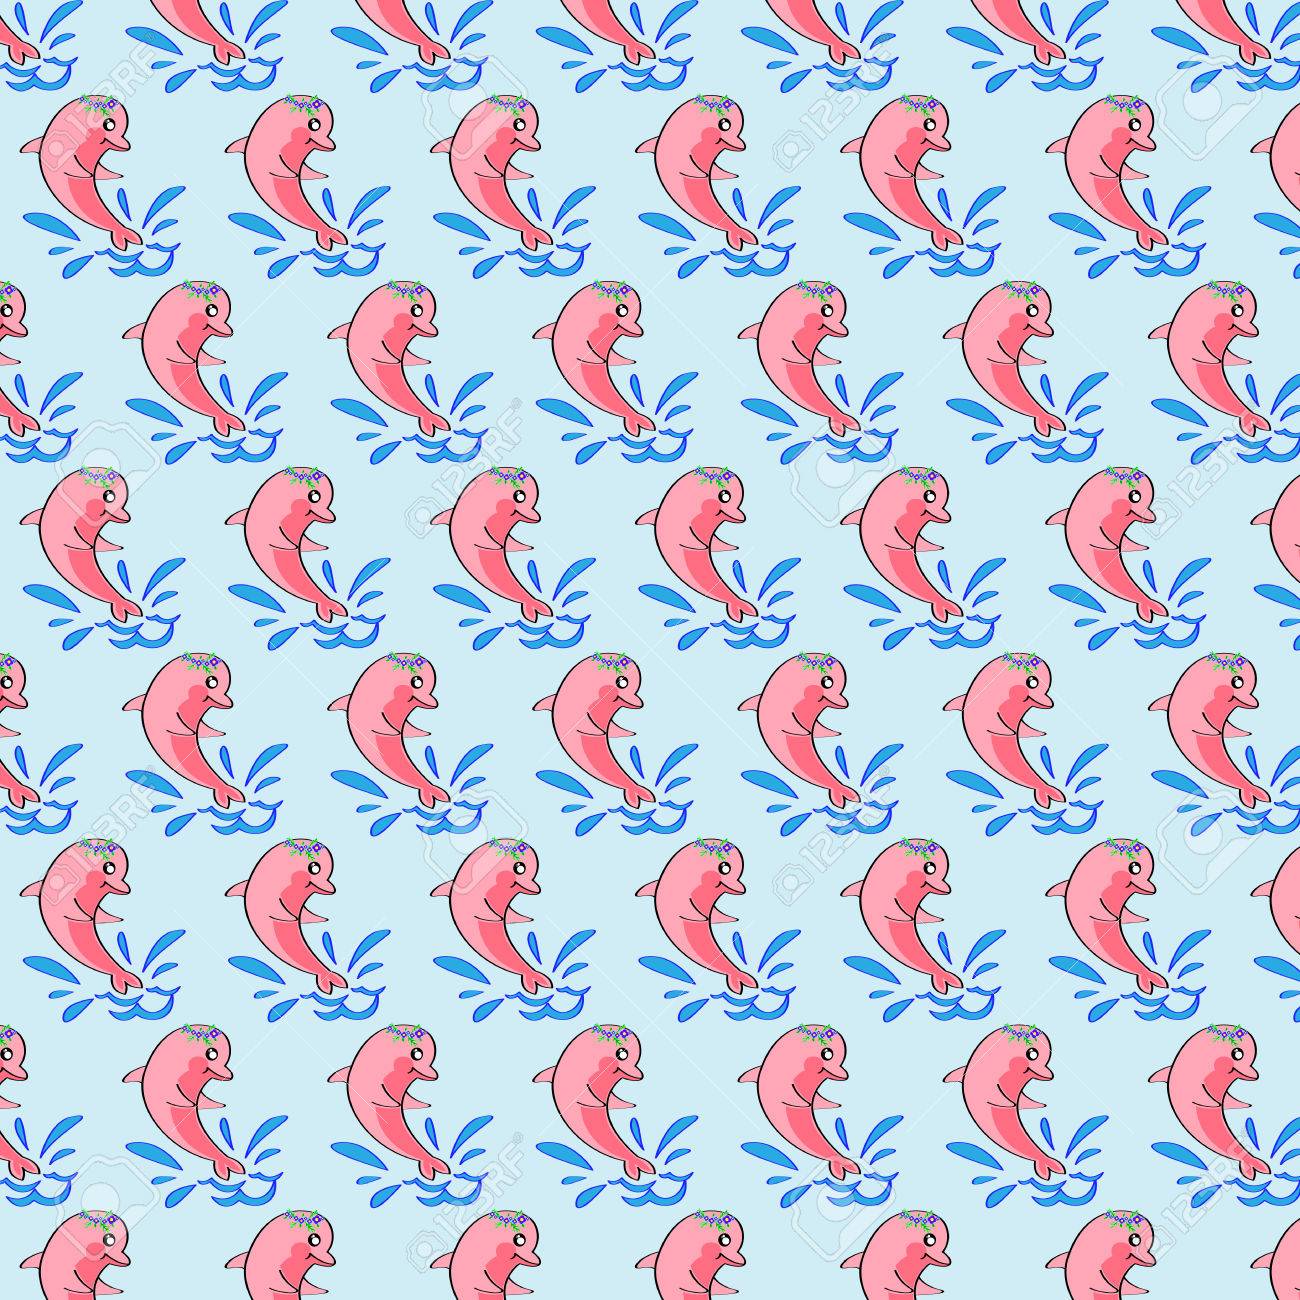 Design Wallpaper Background Of Pink Dolphin Royalty Cliparts